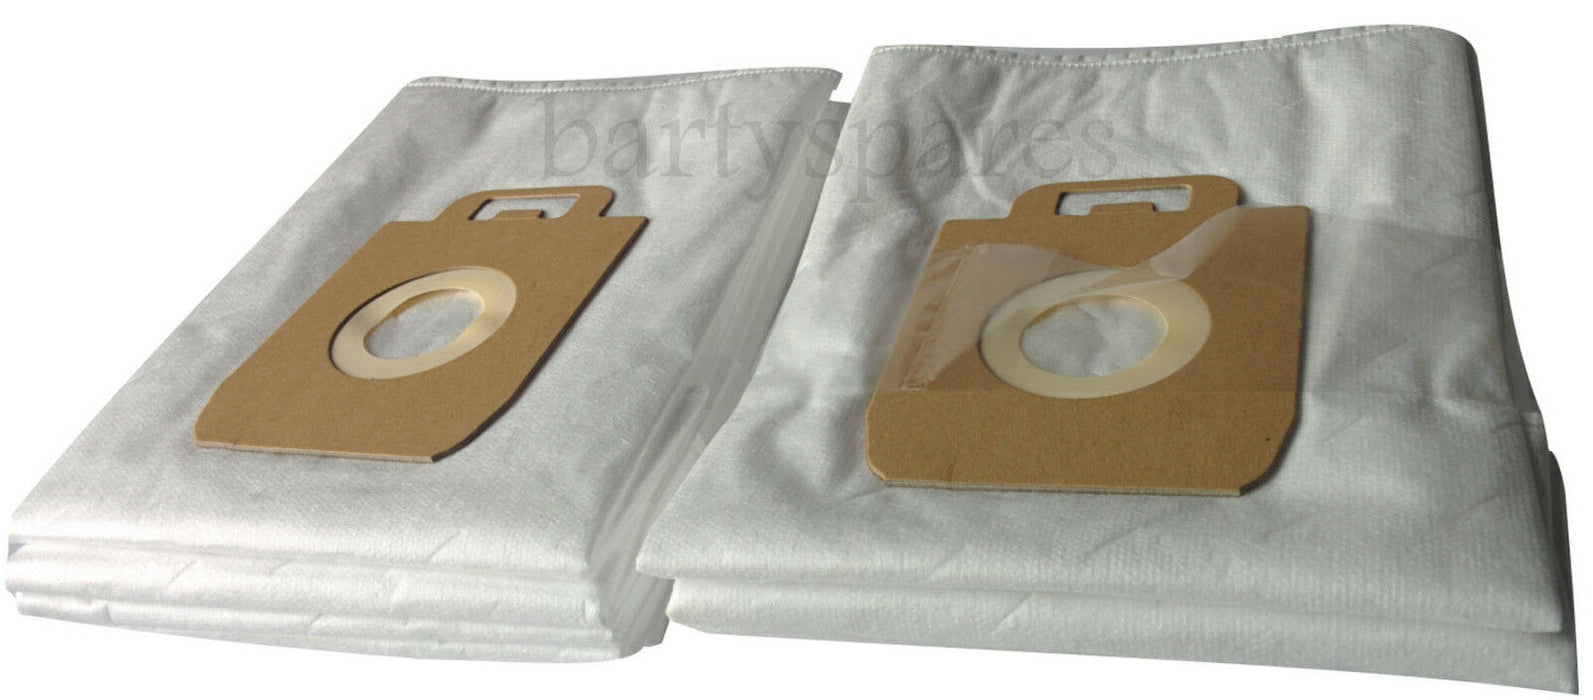 Ten Dust hoover Bags to fit Nilfisk Power Extreme P10 P20 P40 X100 X110 X150